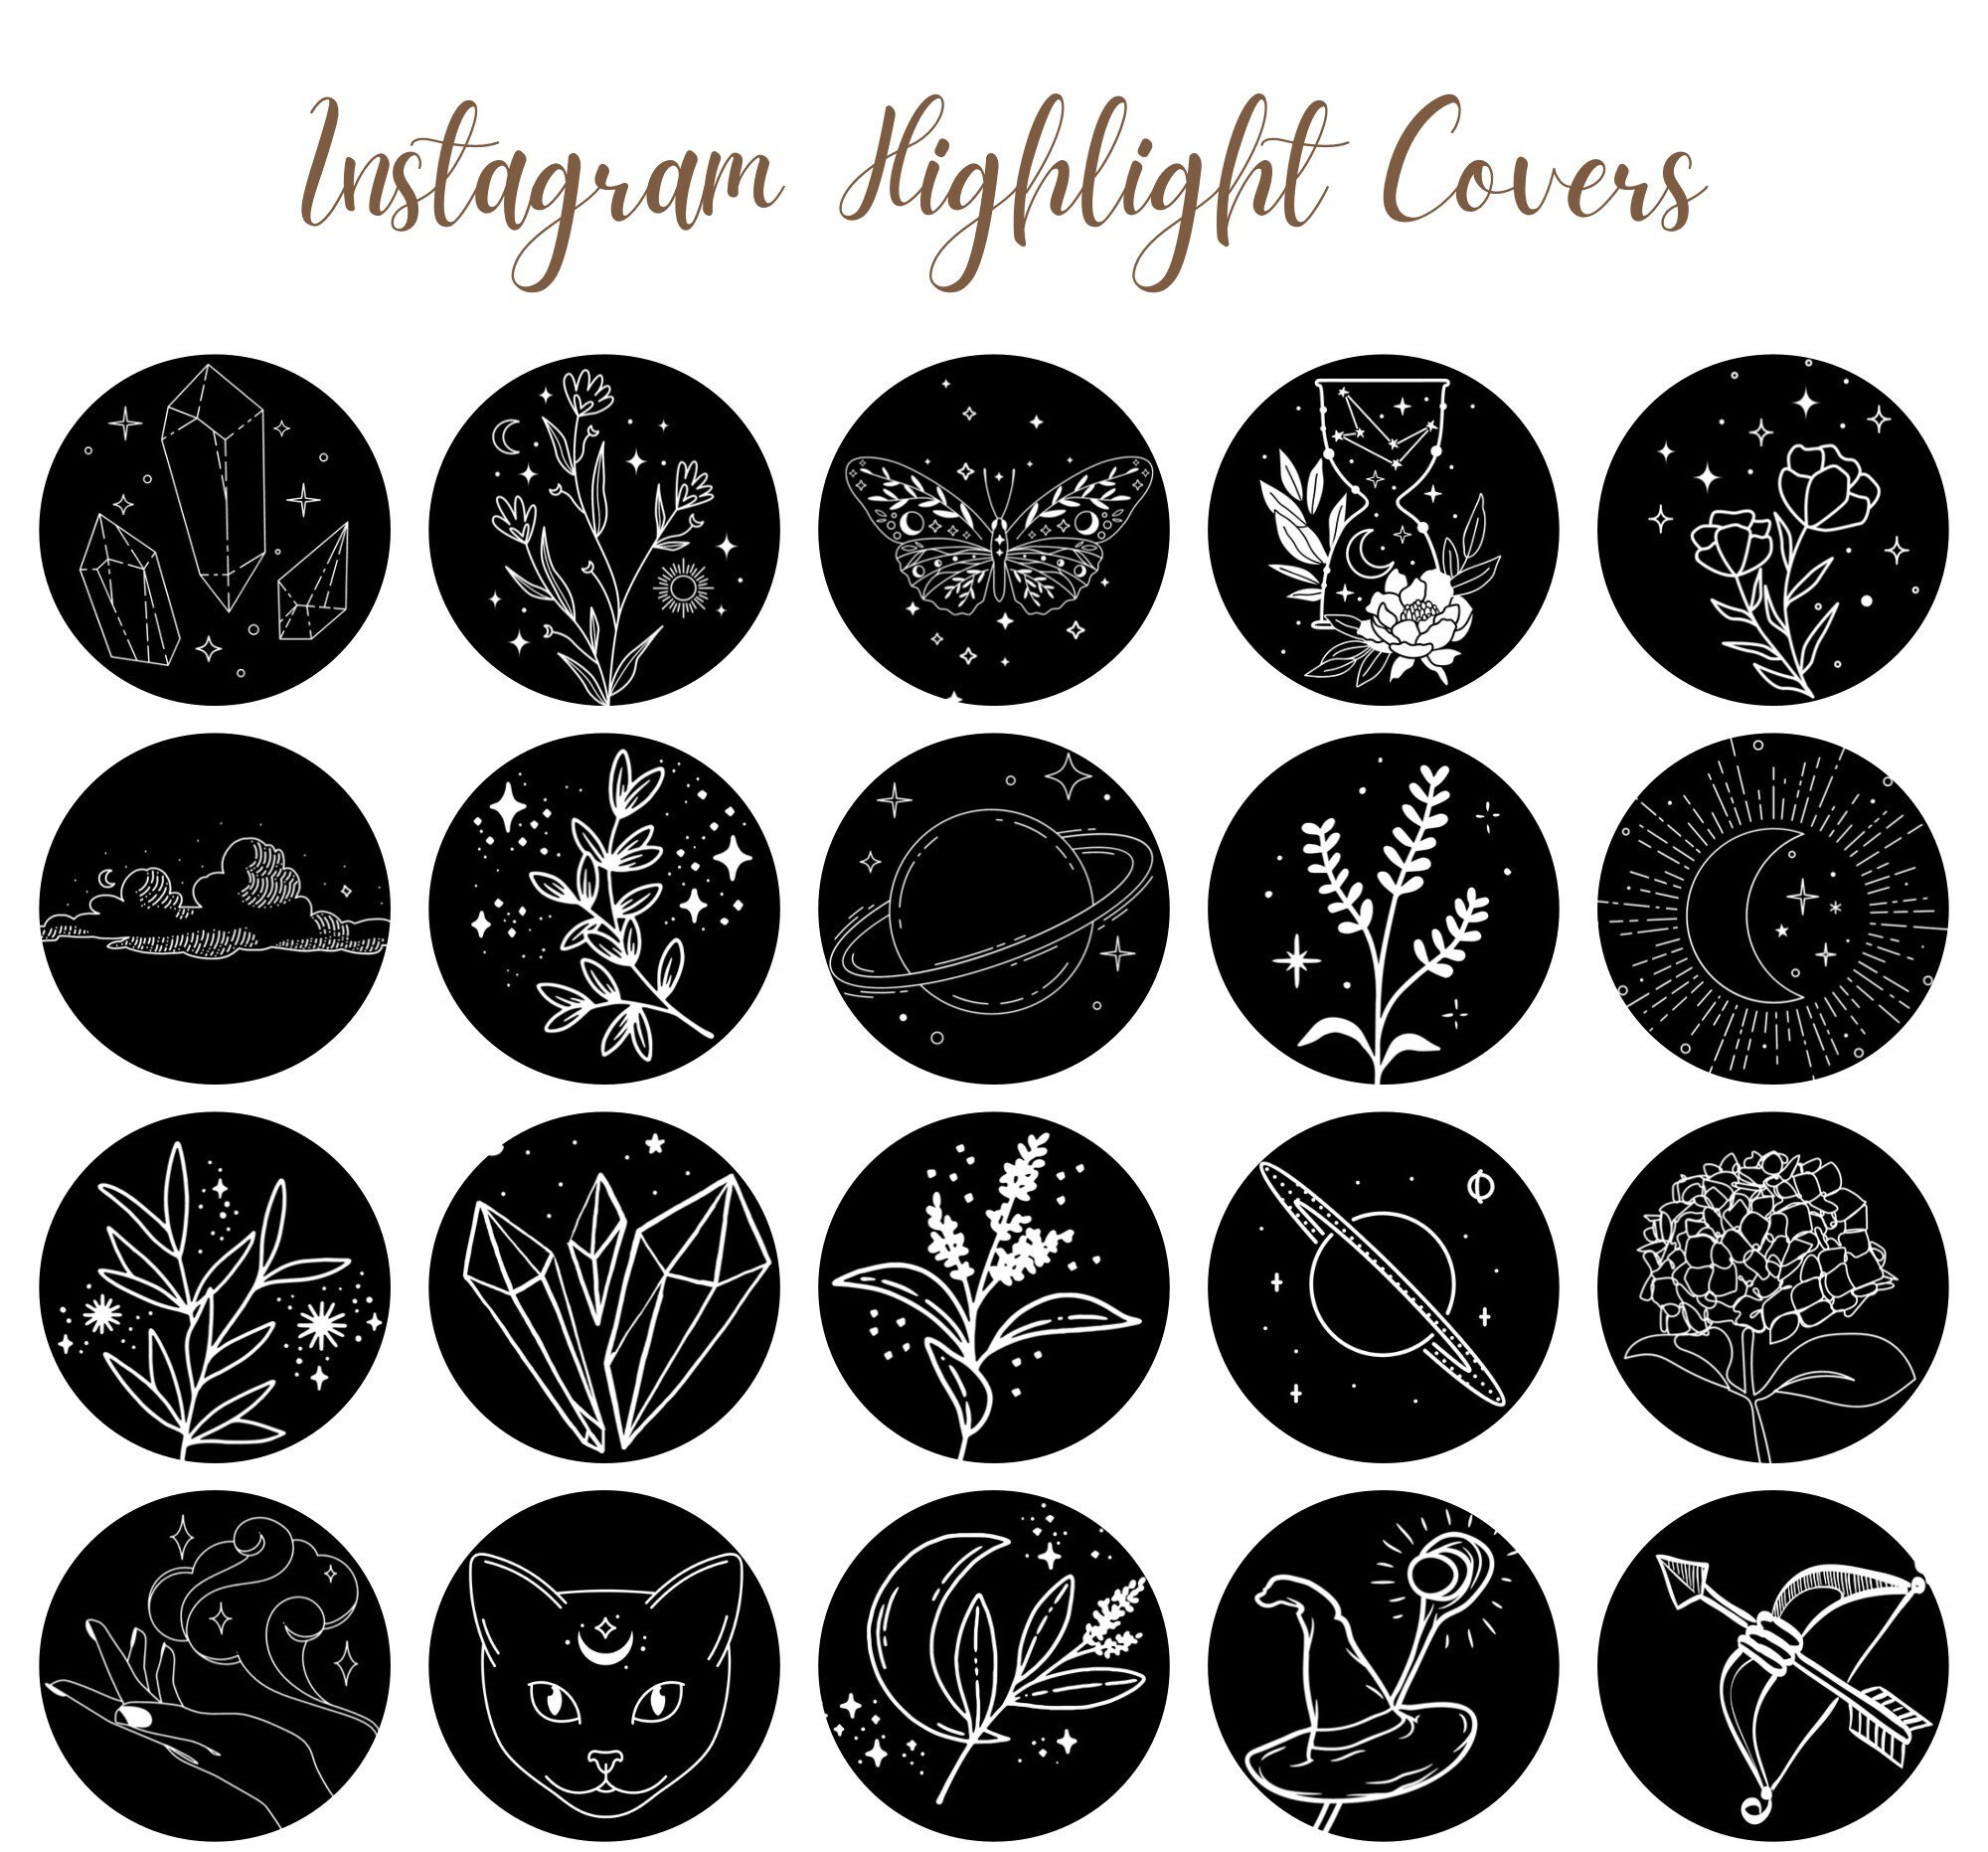 50 Mystic Instagram Stories Highlight Covers Black and White - Etsy